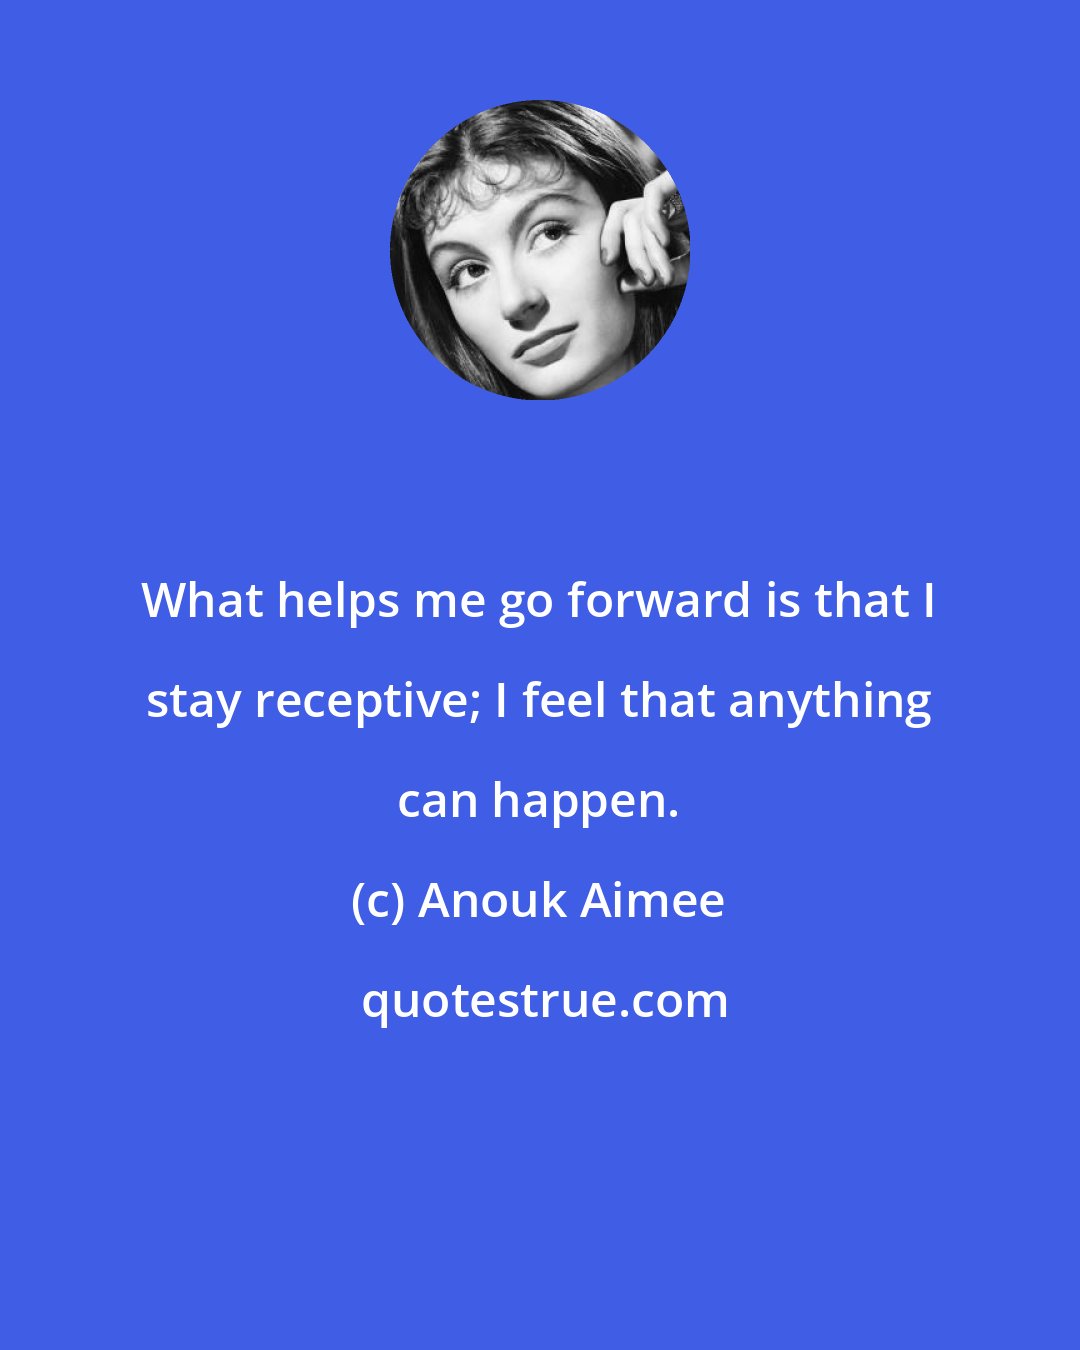 Anouk Aimee: What helps me go forward is that I stay receptive; I feel that anything can happen.